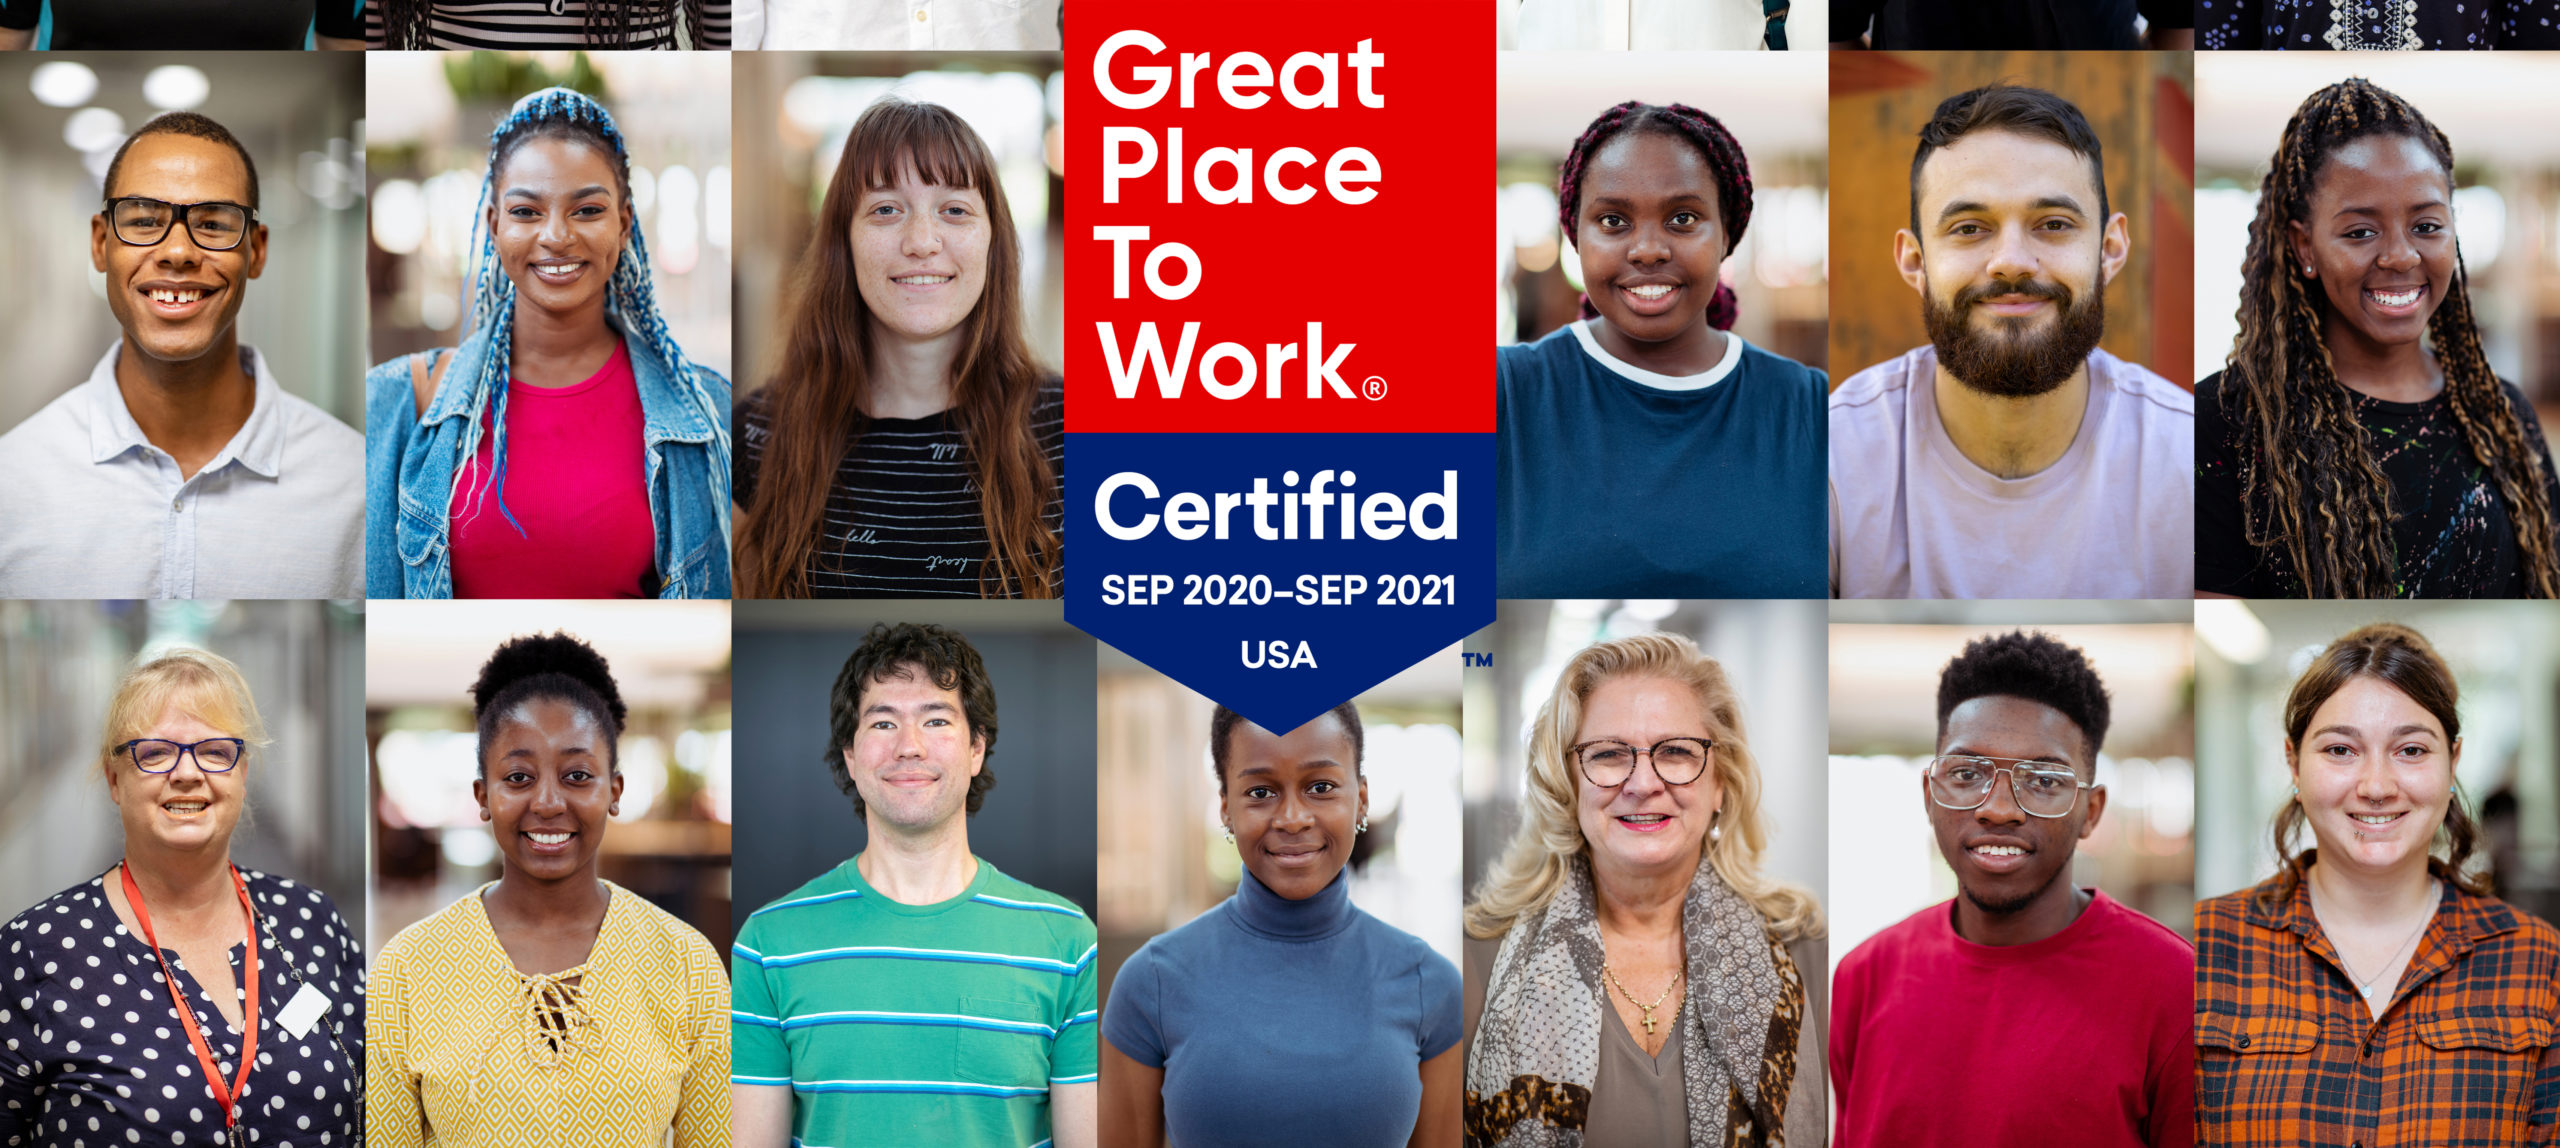  Employees of all backgrounds at a certified great workplace